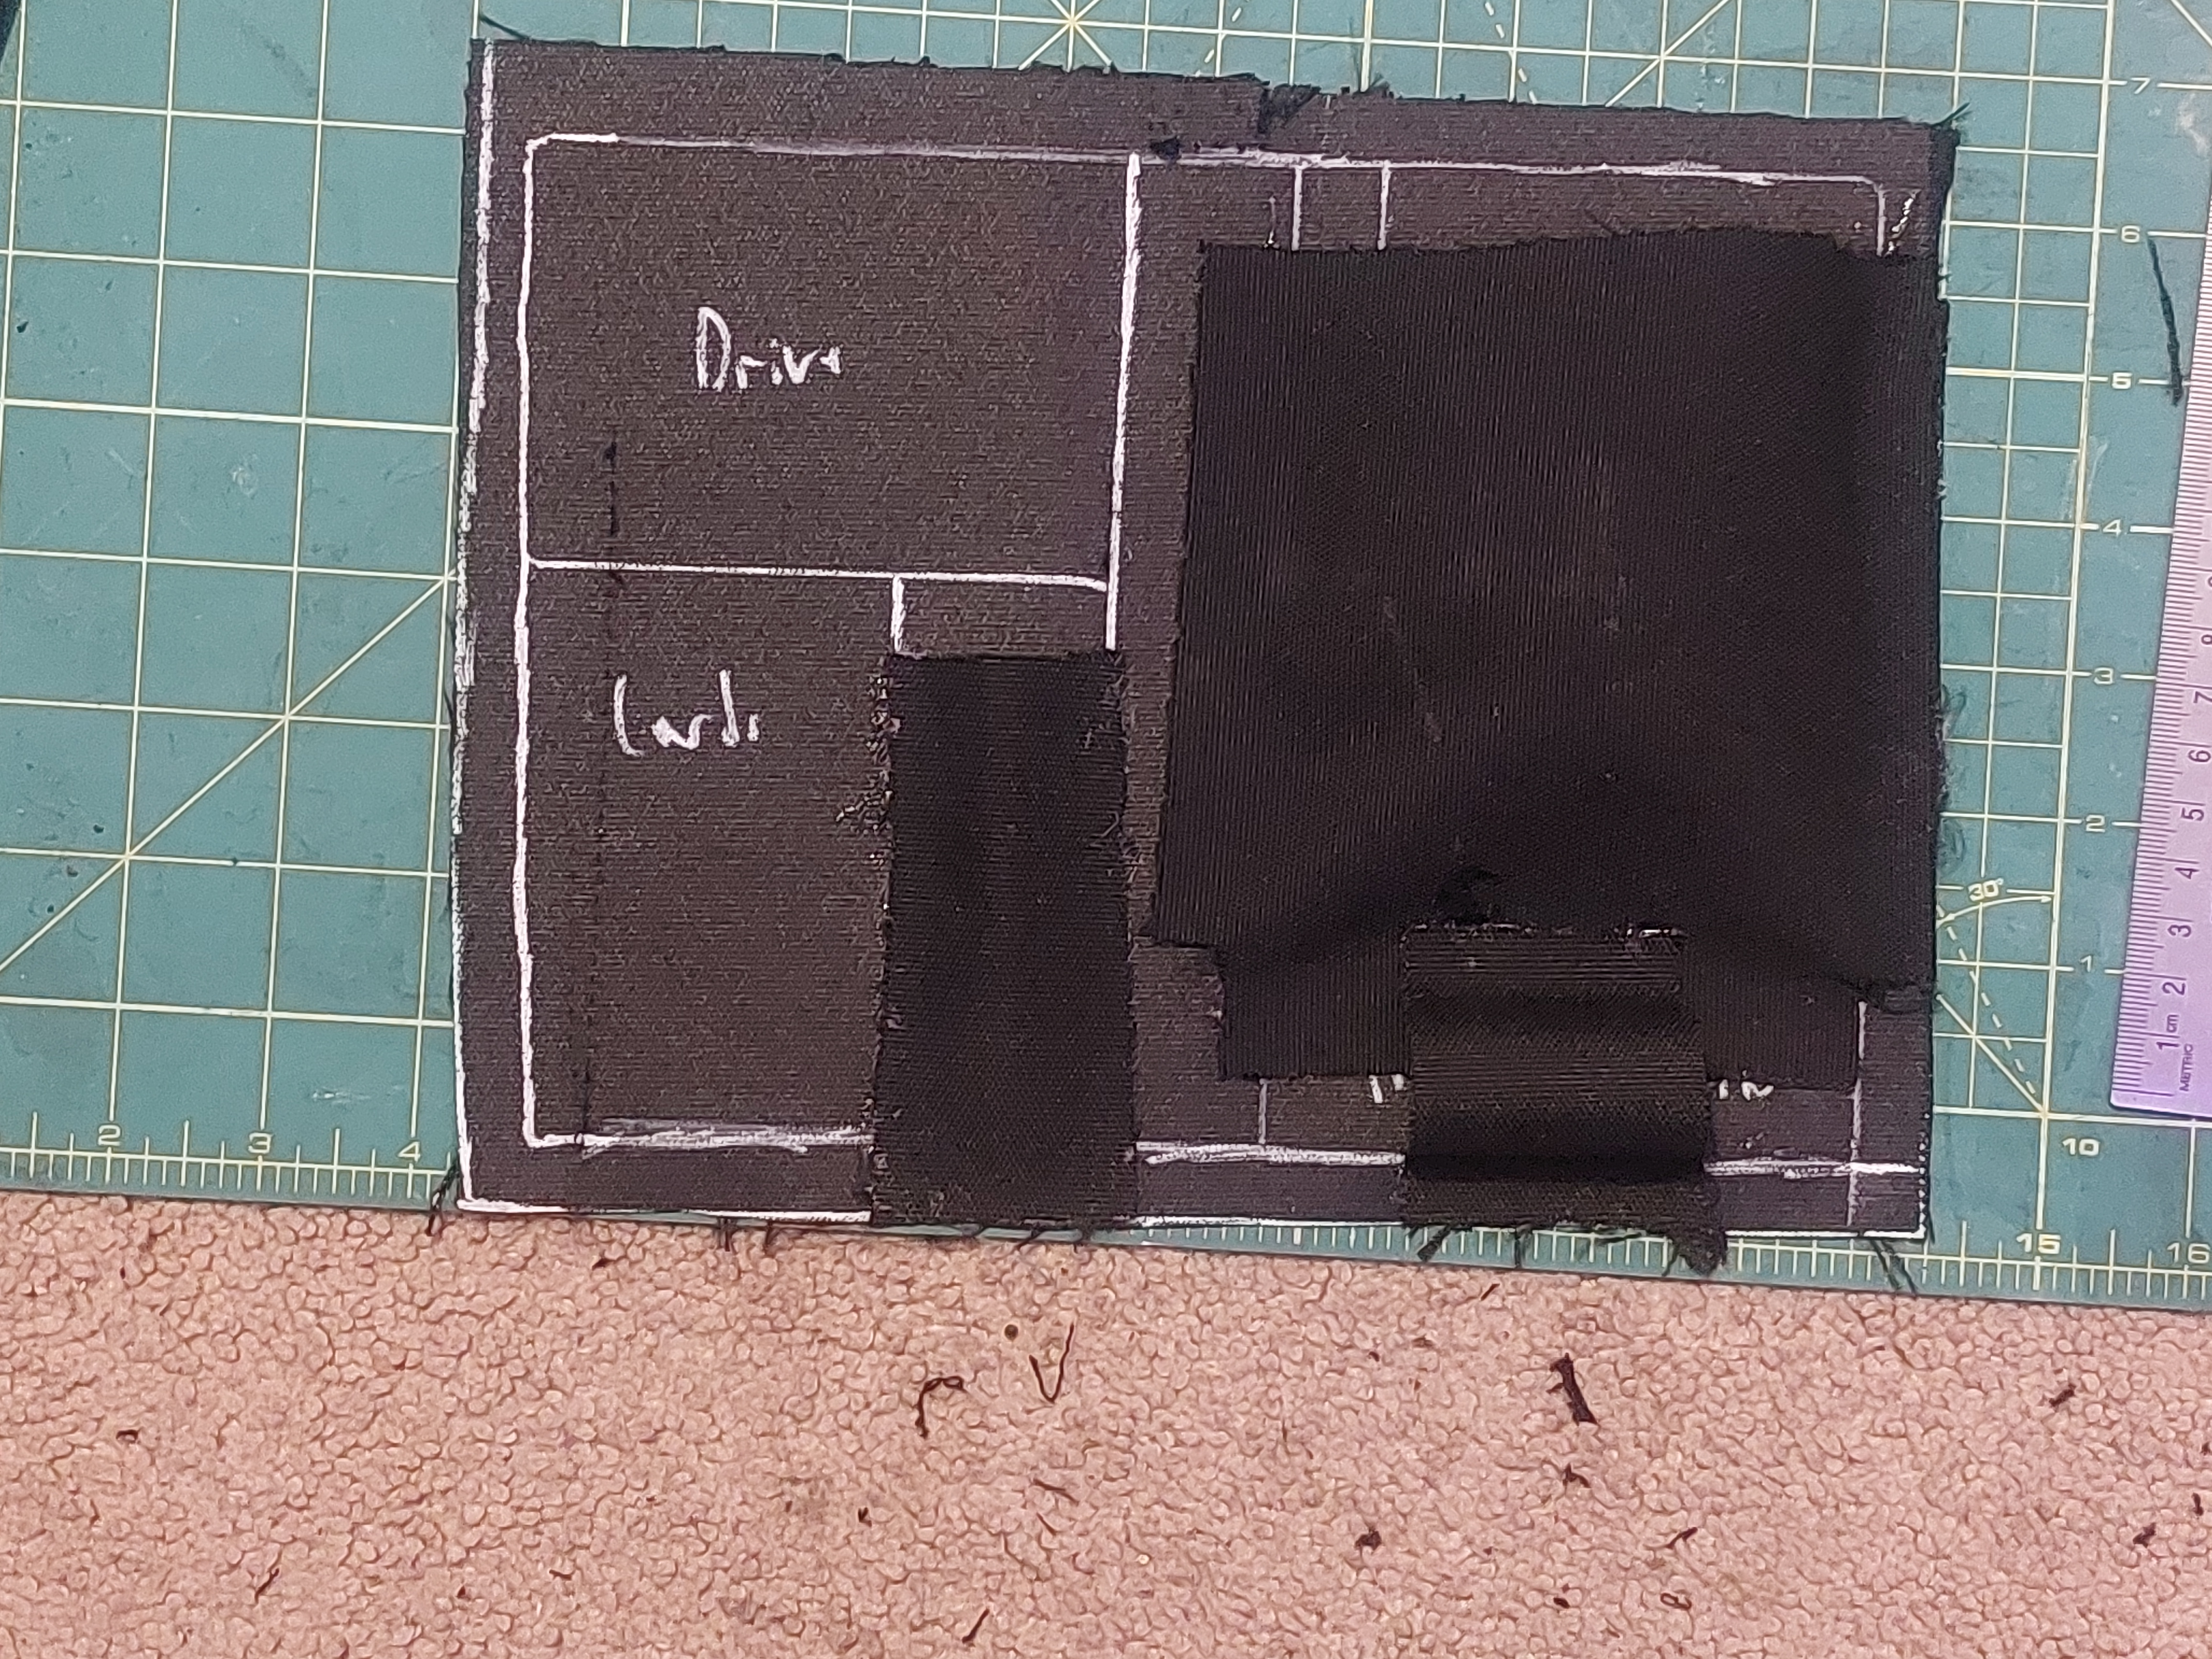 First part of mockup assembly